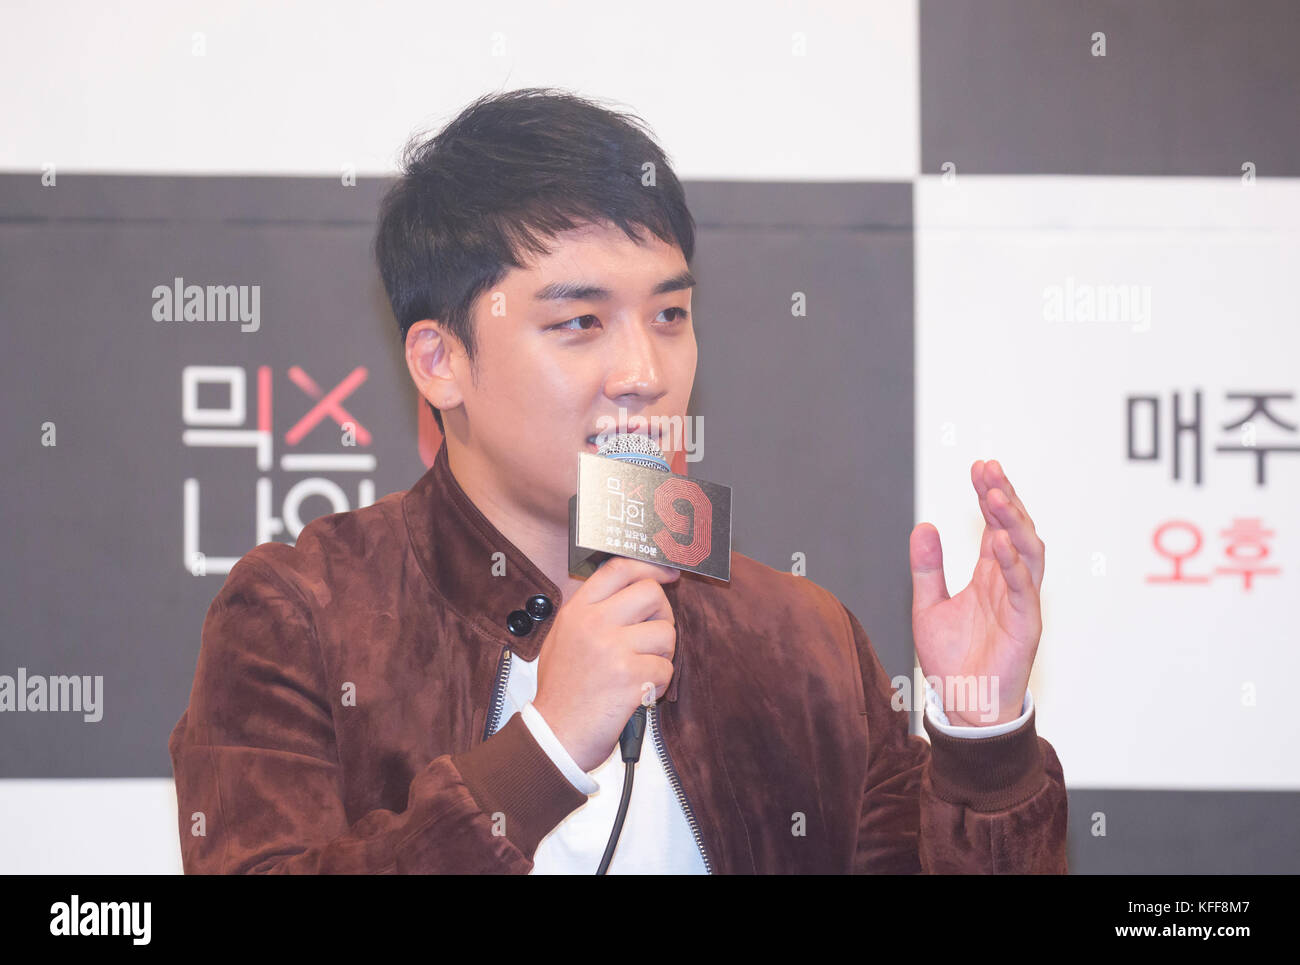 Seungri (BIGBANG), Oct 27, 2017 : Seungri from K-pop boy band BIGBANG attends a press conference for YG Entertainment's upcoming audition programme, Mix 9, in Seoul, South Korea. Mix 9 will be broadcasted on JTBC from October 29, 2017 in South Korea. Credit: Lee Jae-Won/AFLO/Alamy Live News Stock Photo